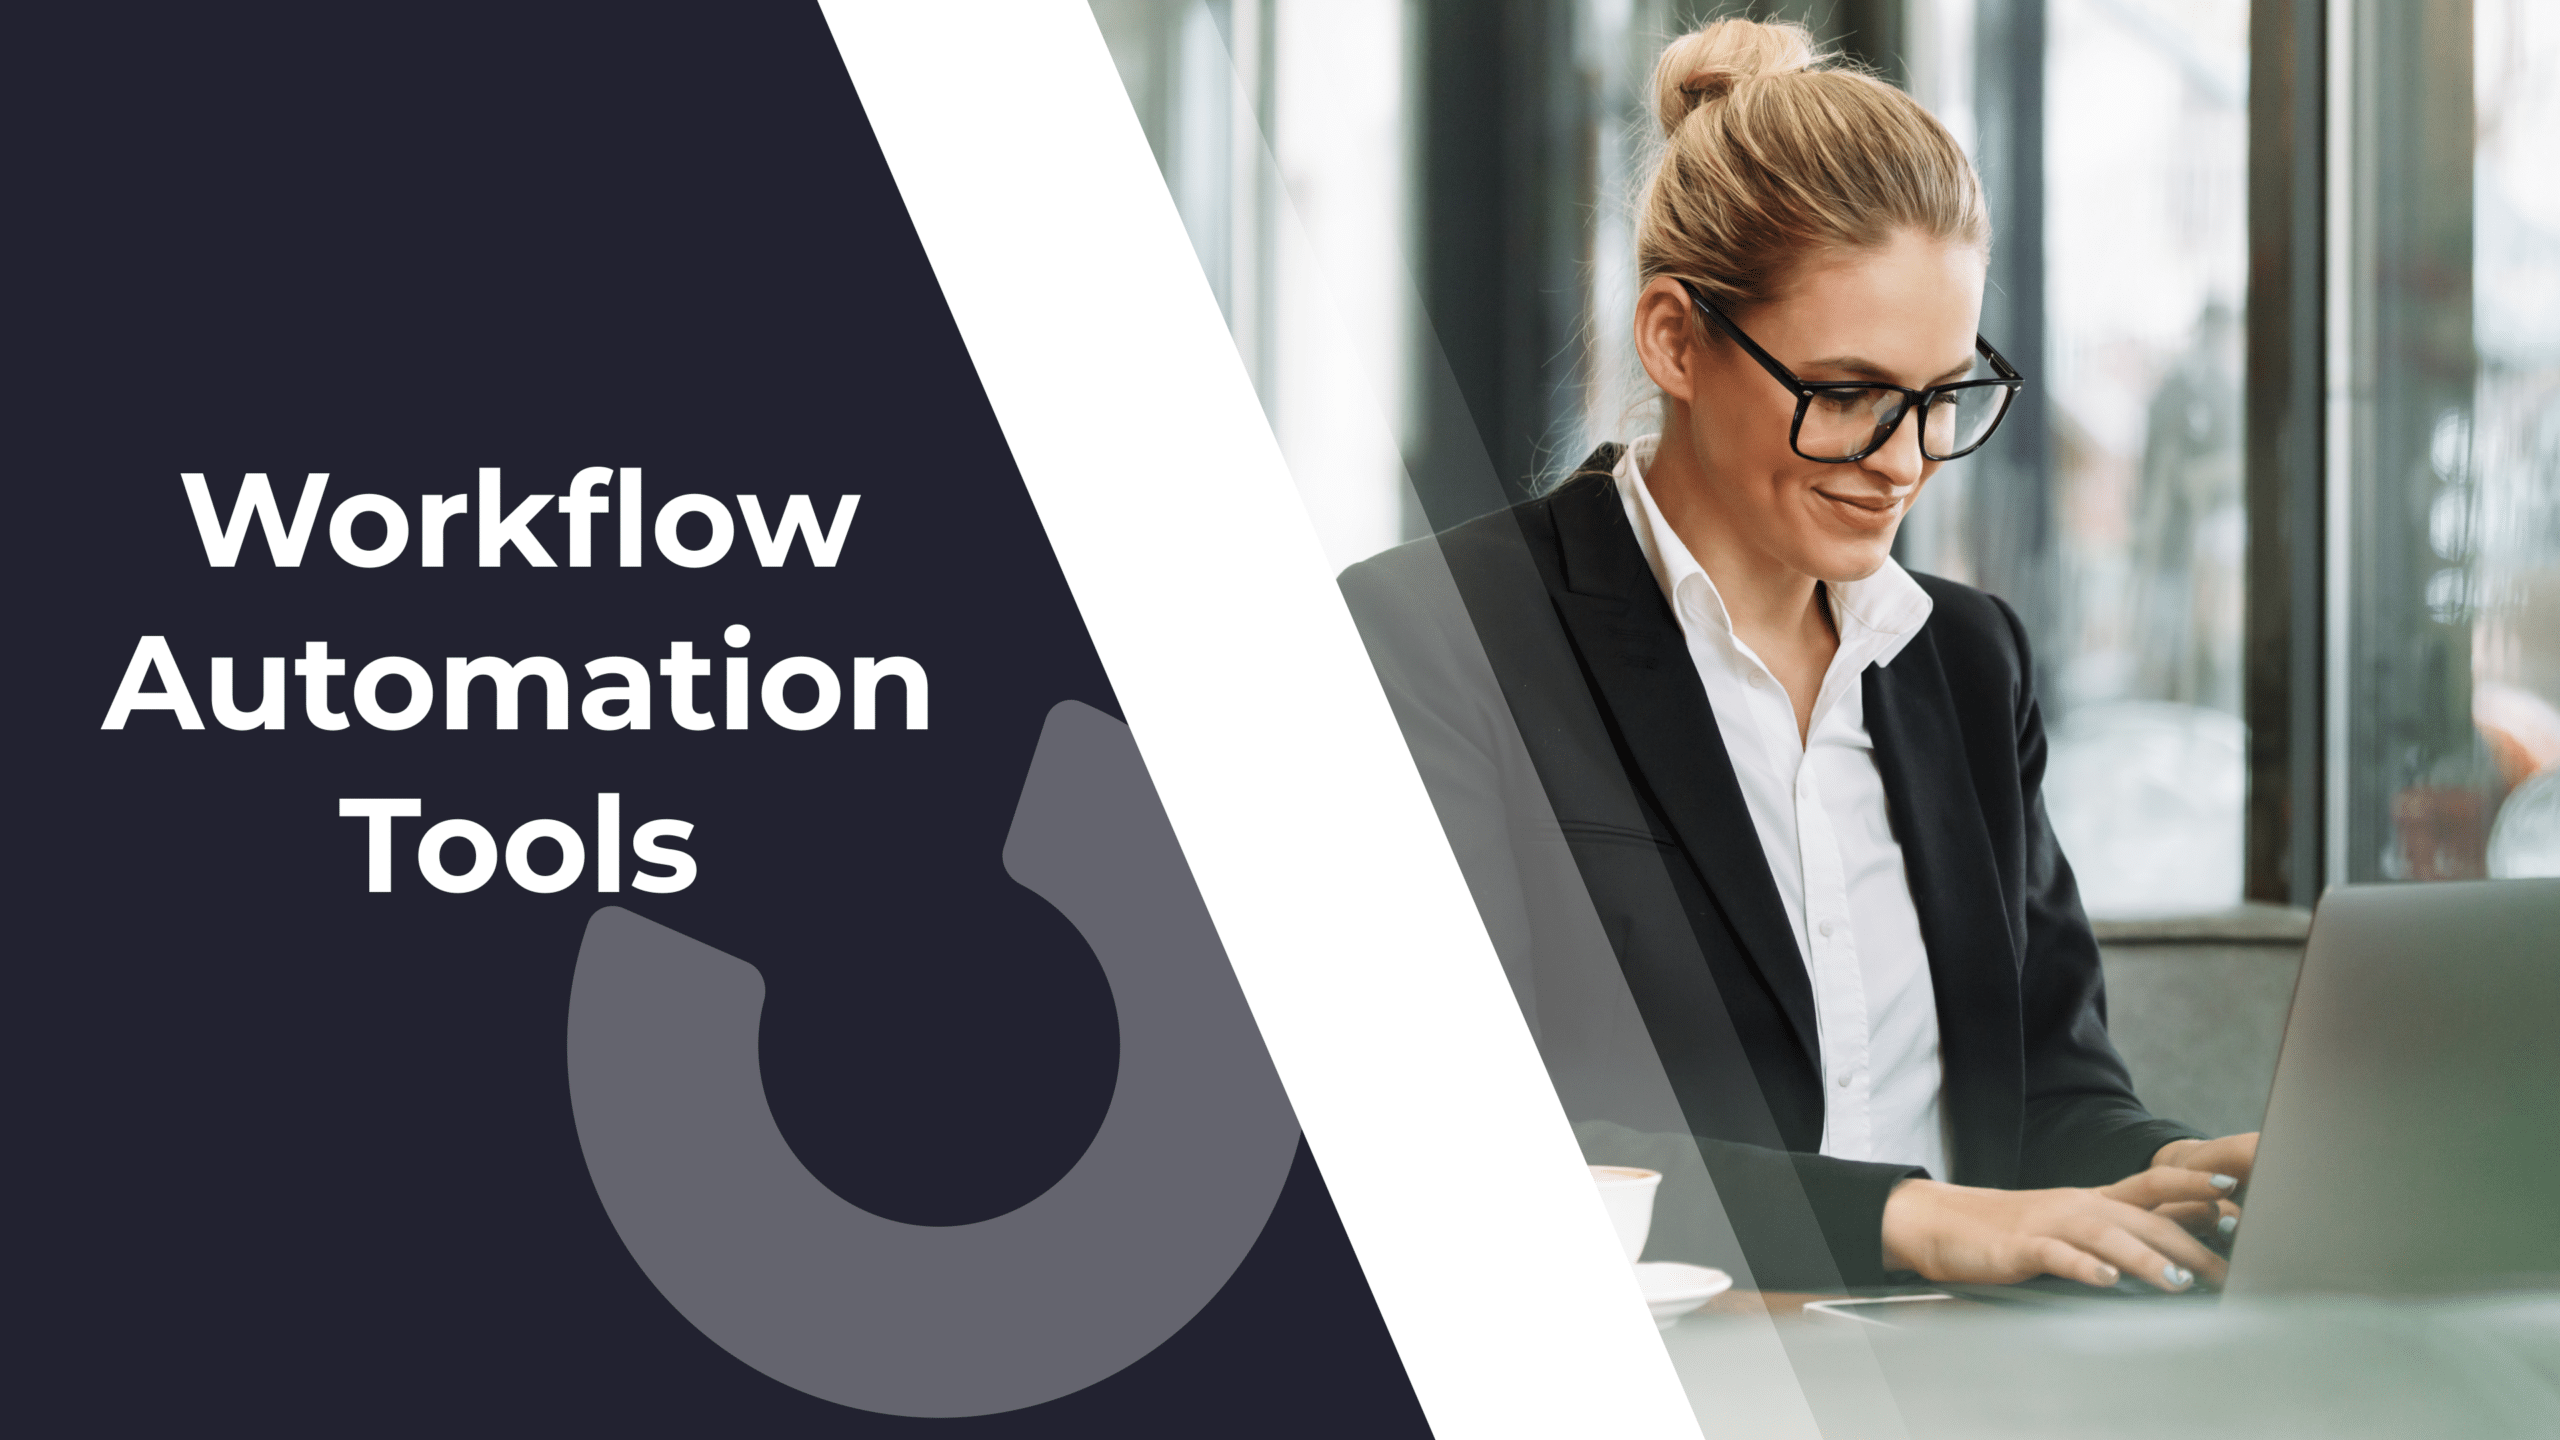 Top 10 Workflow Automation Tools